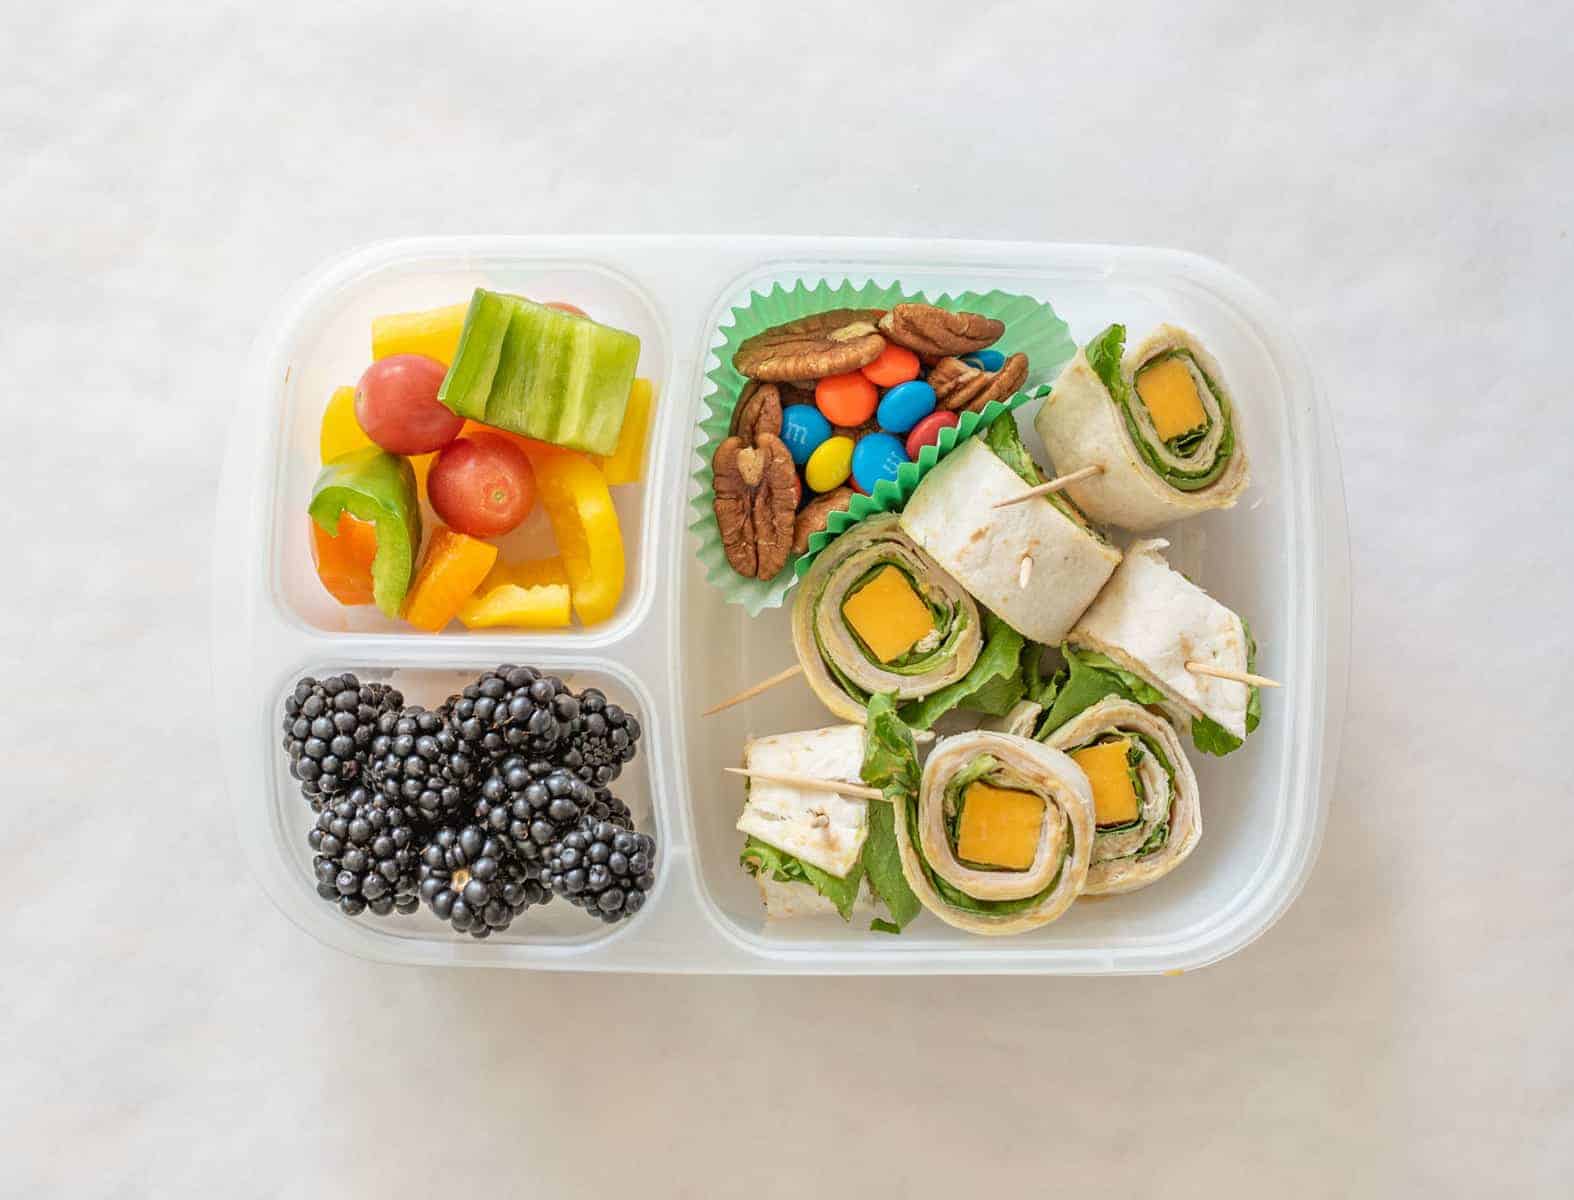 Six Quick & Easy Lunch Boxes  Healthy Back-to-School Lunches